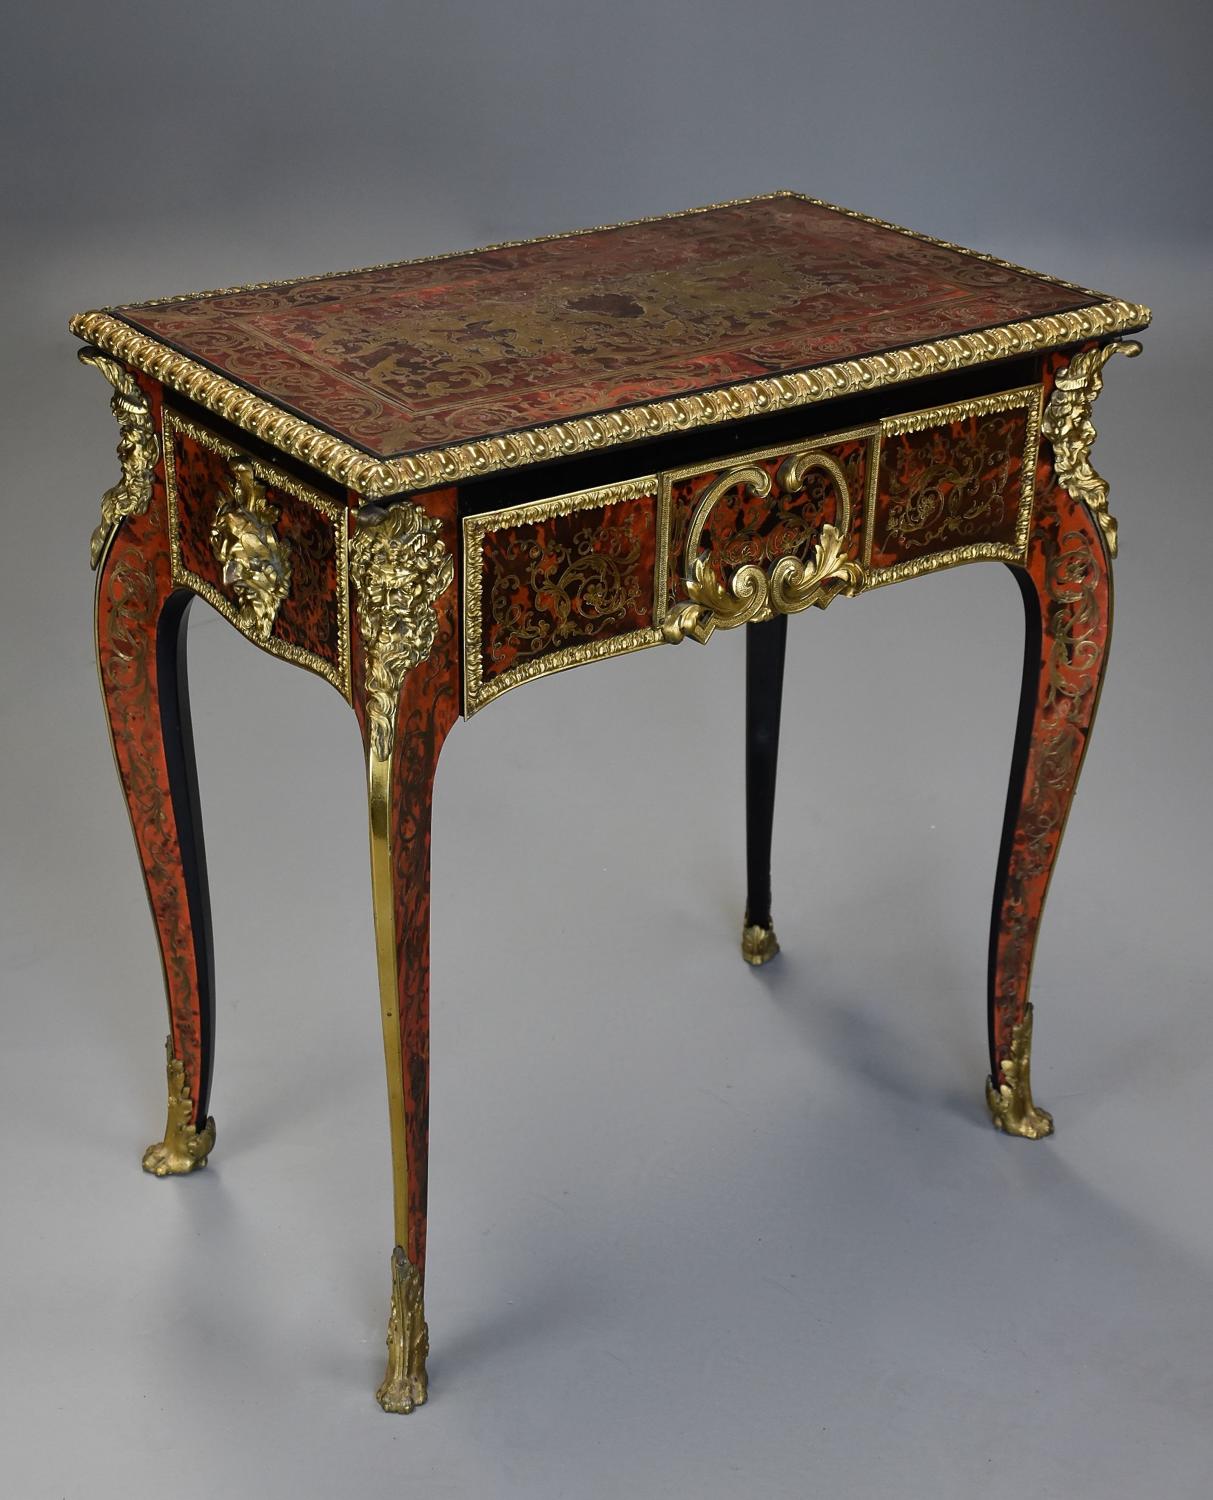 Superb English 19thc ‘Boulle’ centre table in the French style